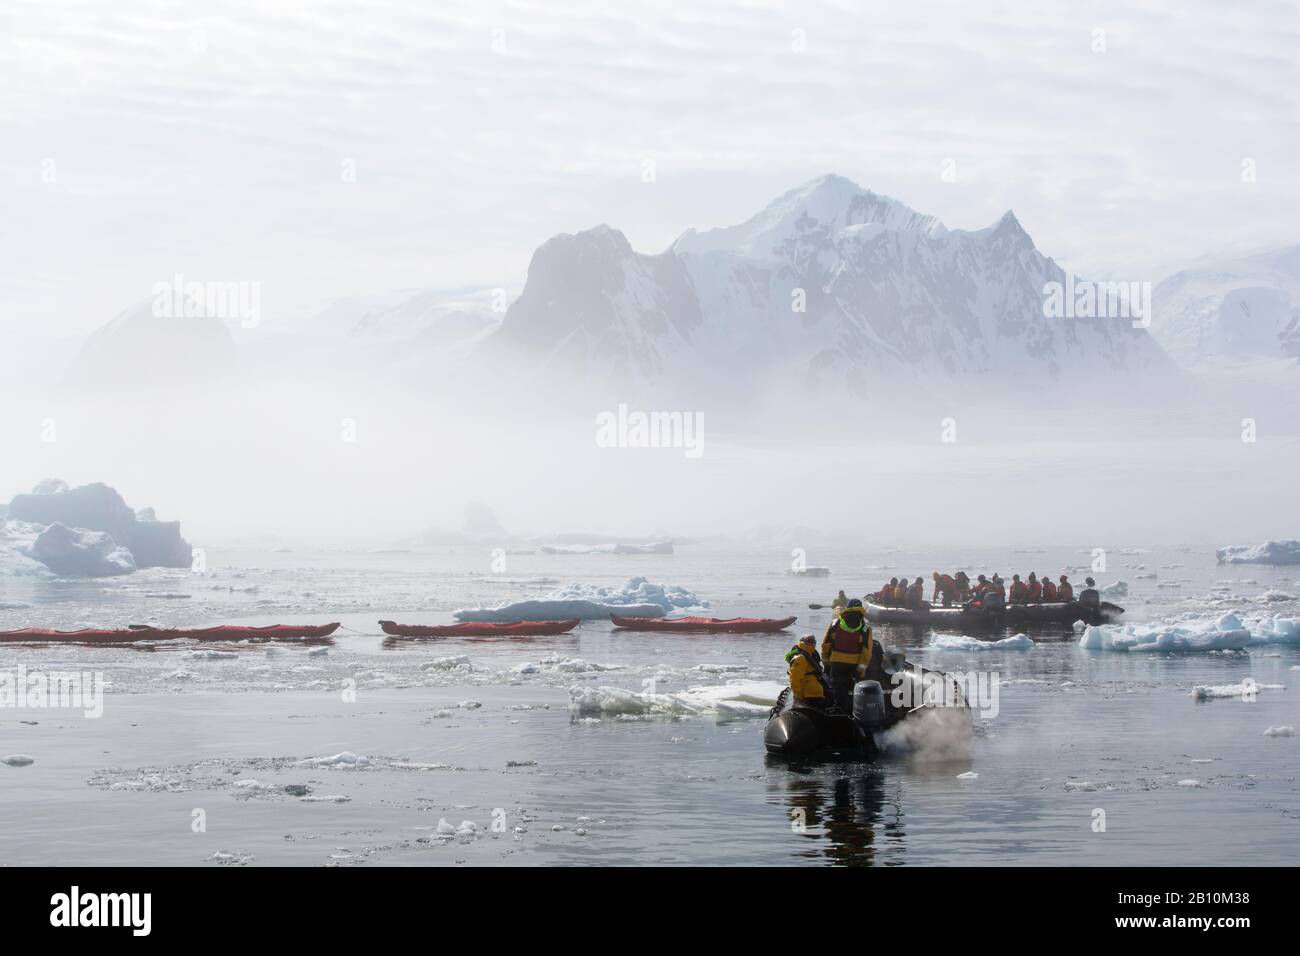 Zodiacs from an expedition cruise ship cruising around the Yalour Islands, Wilhelm Archipelago, Antarctica in misty conditions. Stock Photo